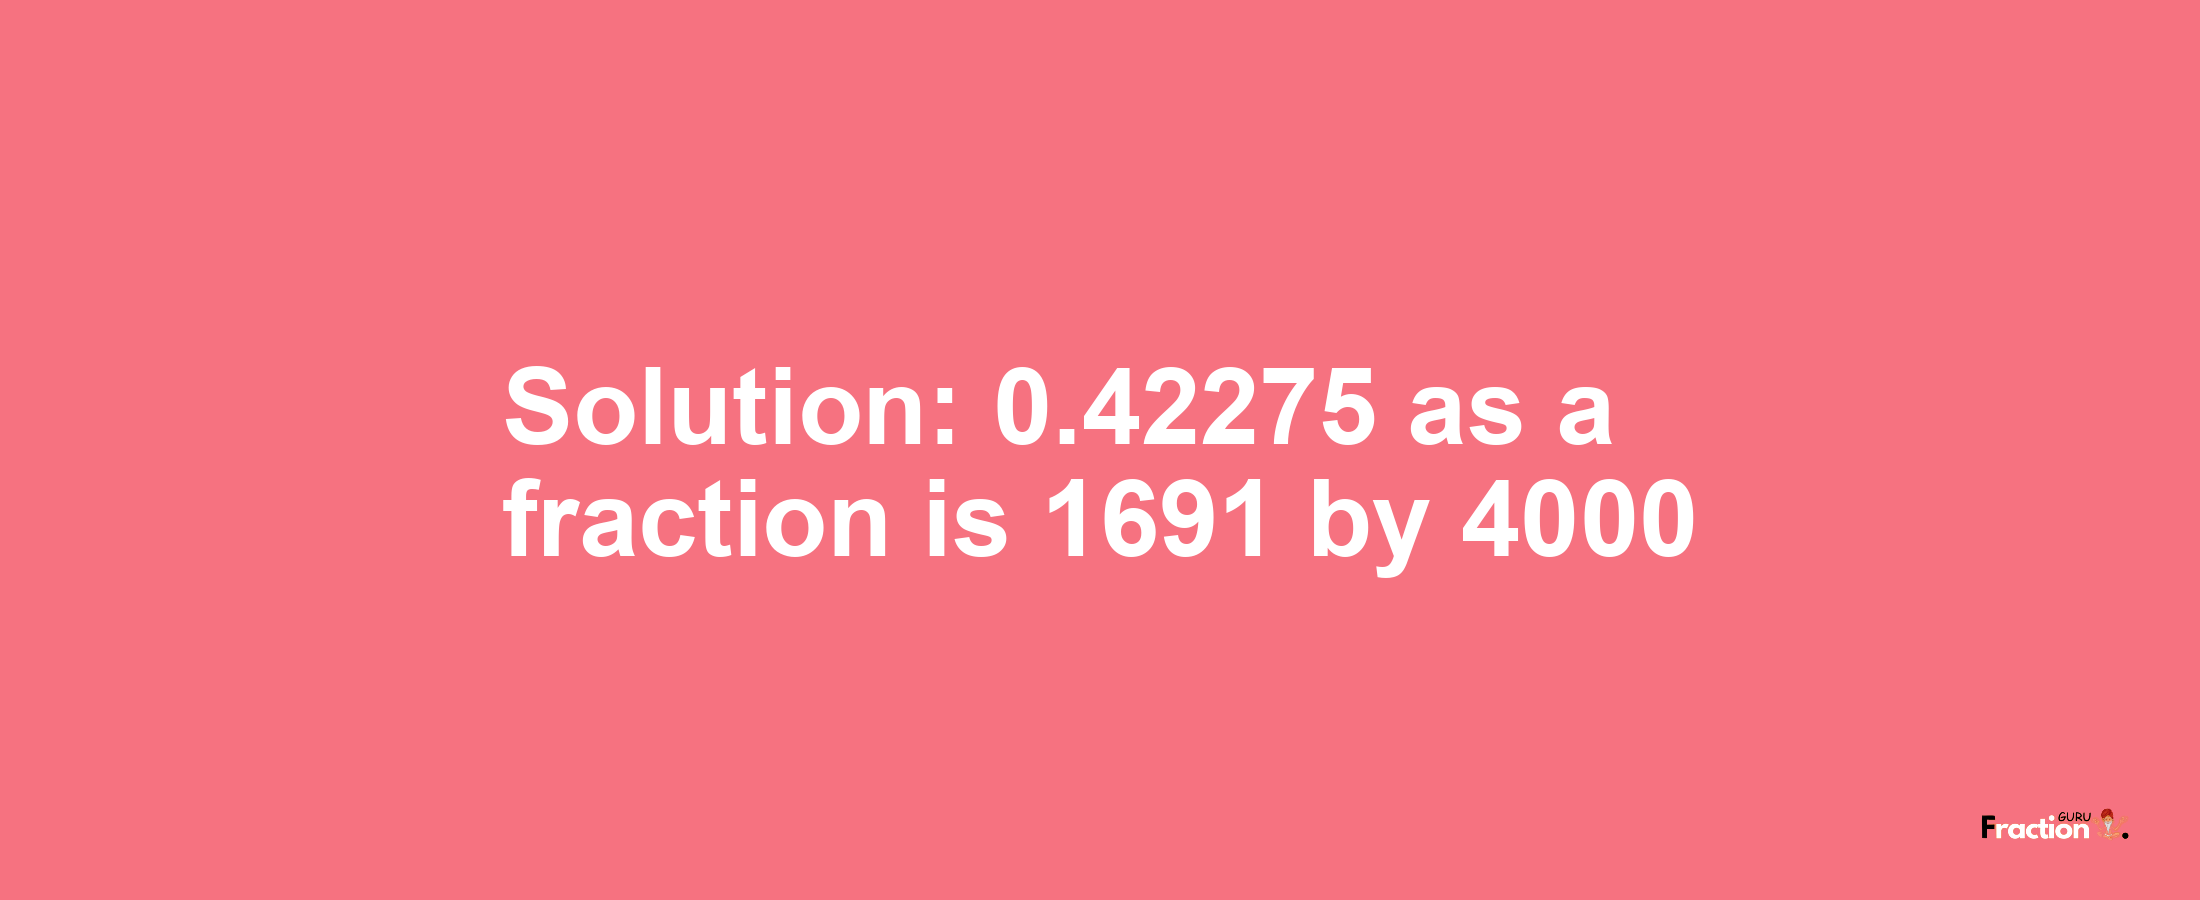 Solution:0.42275 as a fraction is 1691/4000